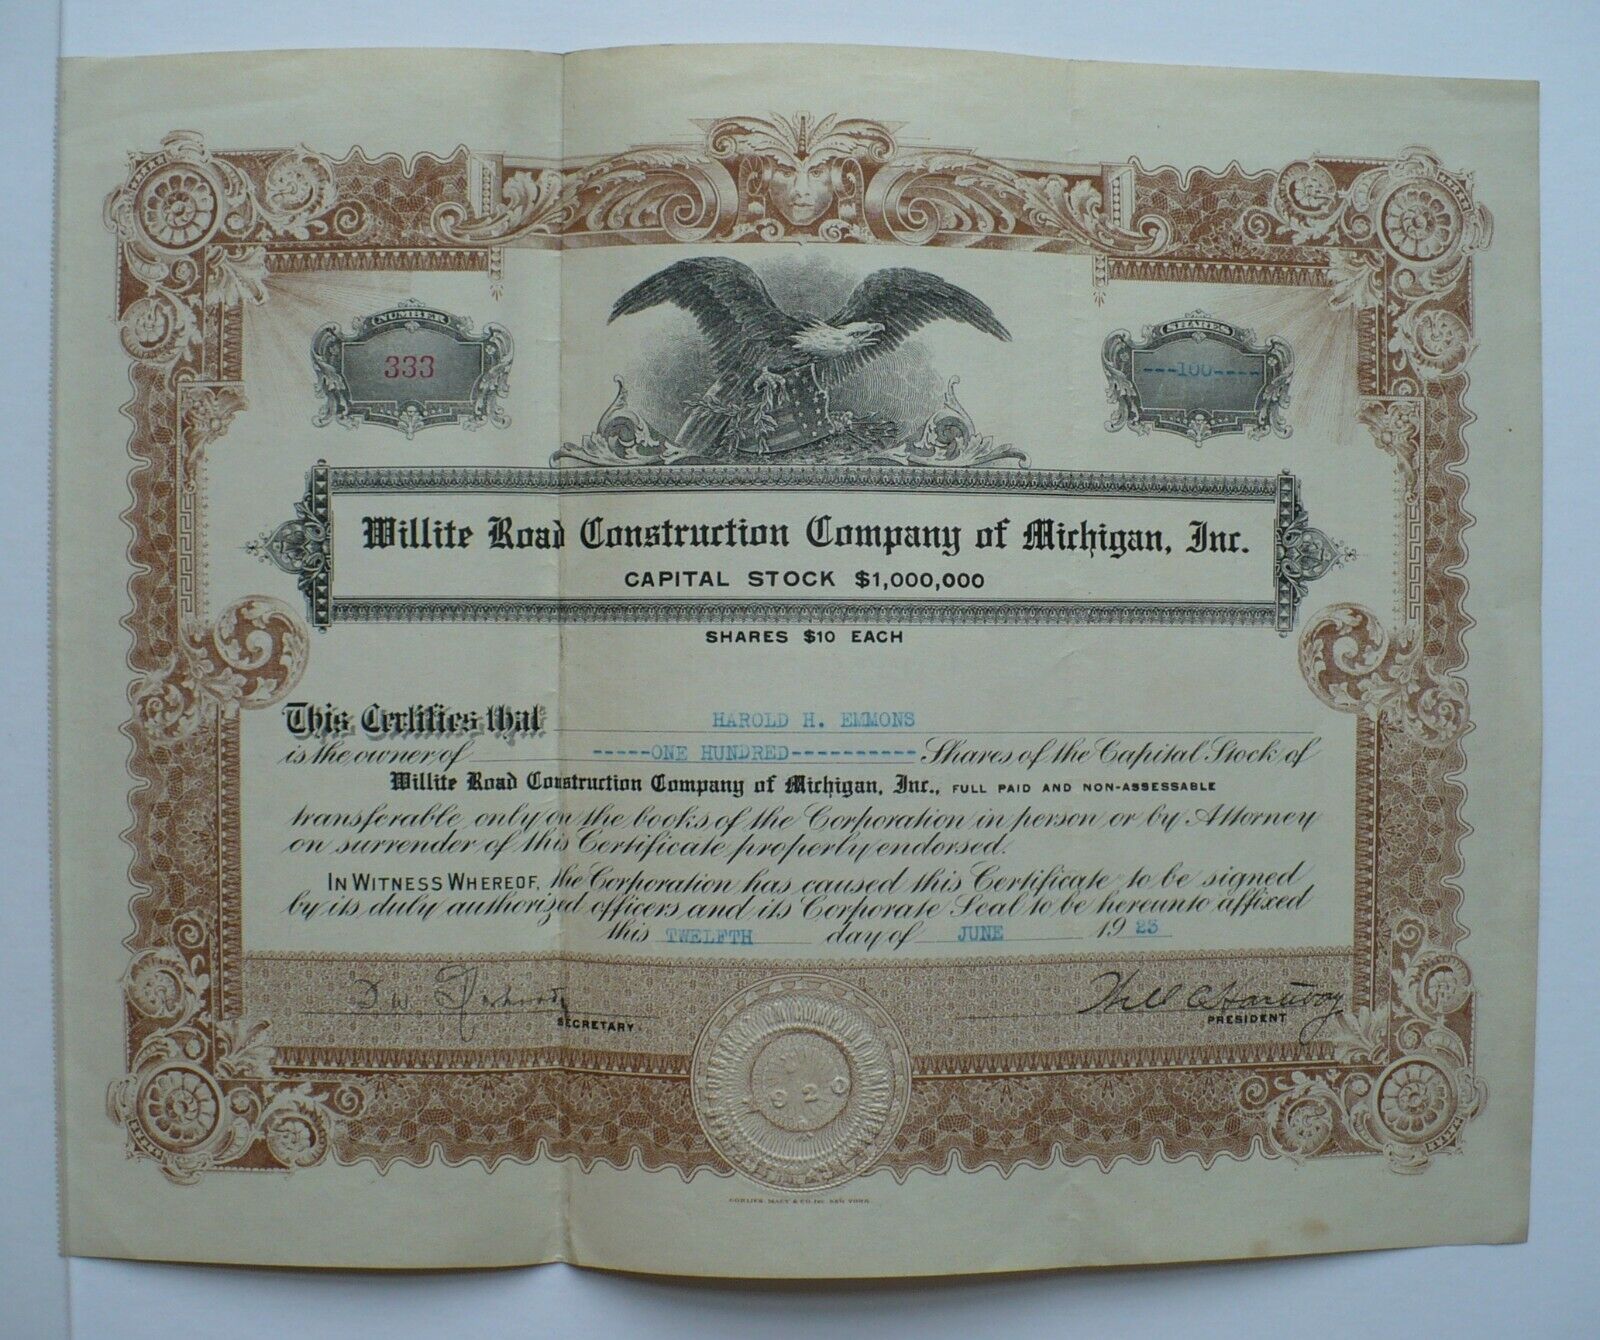 1923 WILLITE ROAD CONSTRUCTION COMPANY MICHIGAN STOCK CERTIFICATE, 100 SHARES